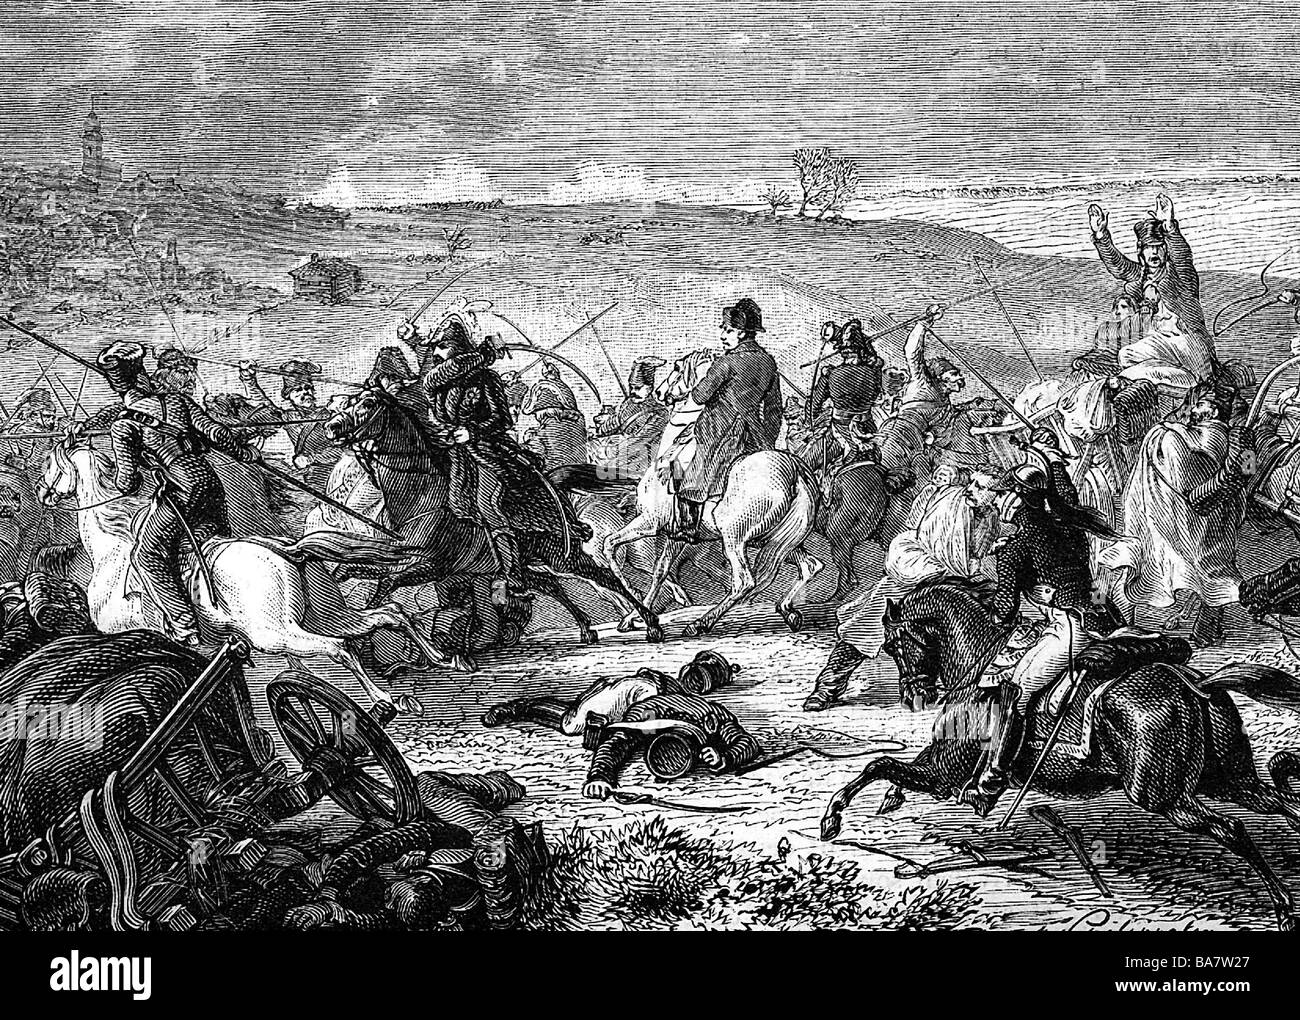 events, War of the Sixth Coalition 1812 - 1814, Russian campaign 1812, Battle of Borodino, 7.9.1812, Cossack attacking French Emperor Napoleon I, wood engraving after Philippoteaux, 19th century, Napoleonic Wars, Russia, Russian cavalry, Bonaparte, staff officers, skirmish, historic, historical, people, Stock Photo